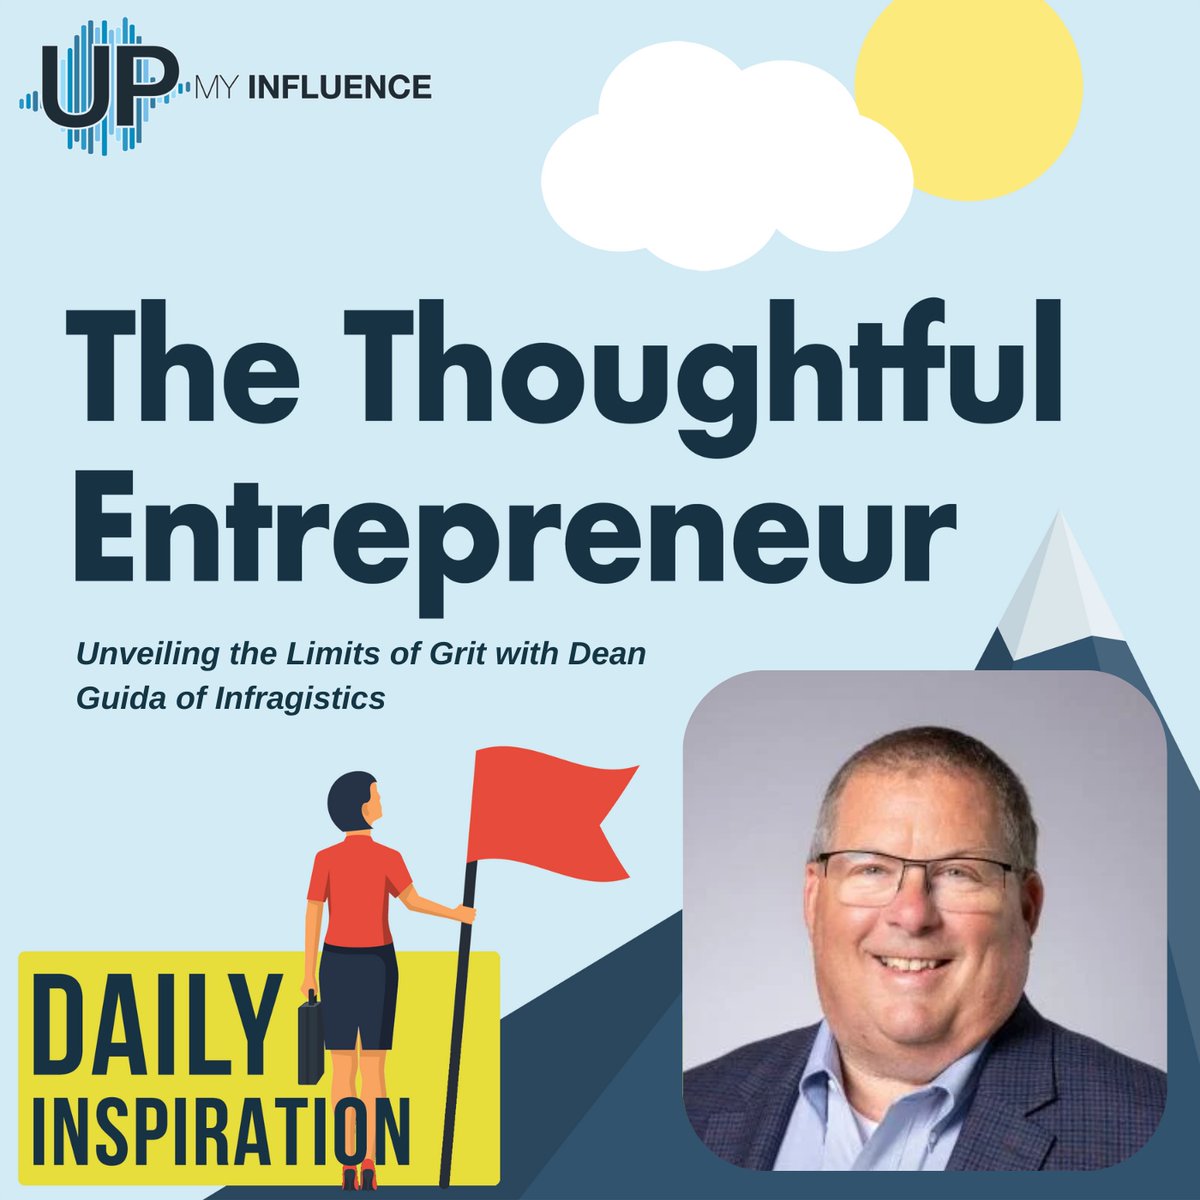 @infragistics' Dean Guida uncovers the truth behind the grit myth, explores Infragistics' innovative model, and talks about the real drivers of success. 

upmyinfluence.com/podcasts/1884-…

#TheThoughtfulEntrepreneur #Podcast #Entrepreneurship #Grit #Innovation #SuccessTips #JournoRequest